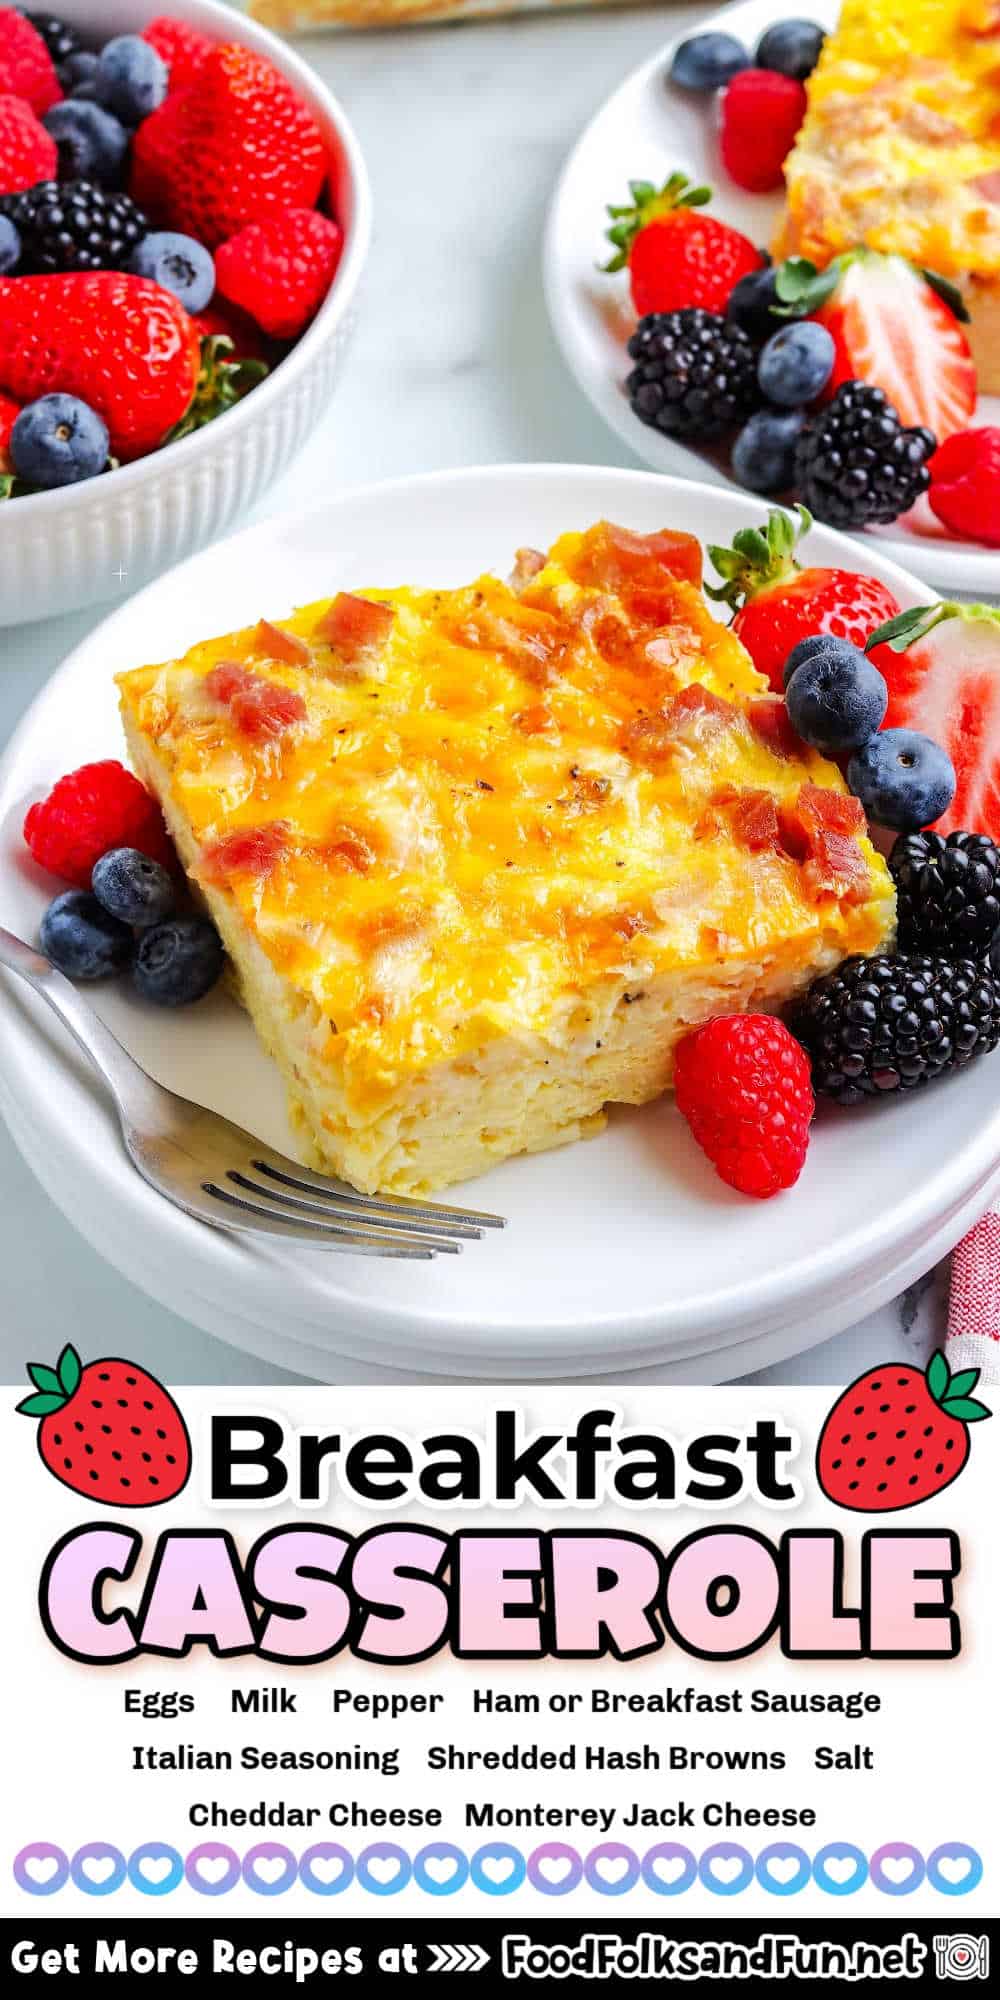 This easy and delicious breakfast casserole bursts with gooey cheese, savory ham, and fluffy eggs. It's the perfect make-ahead meal for busy mornings, feeding a crowd, or simply indulging in a warm, comforting breakfast. via @foodfolksandfun